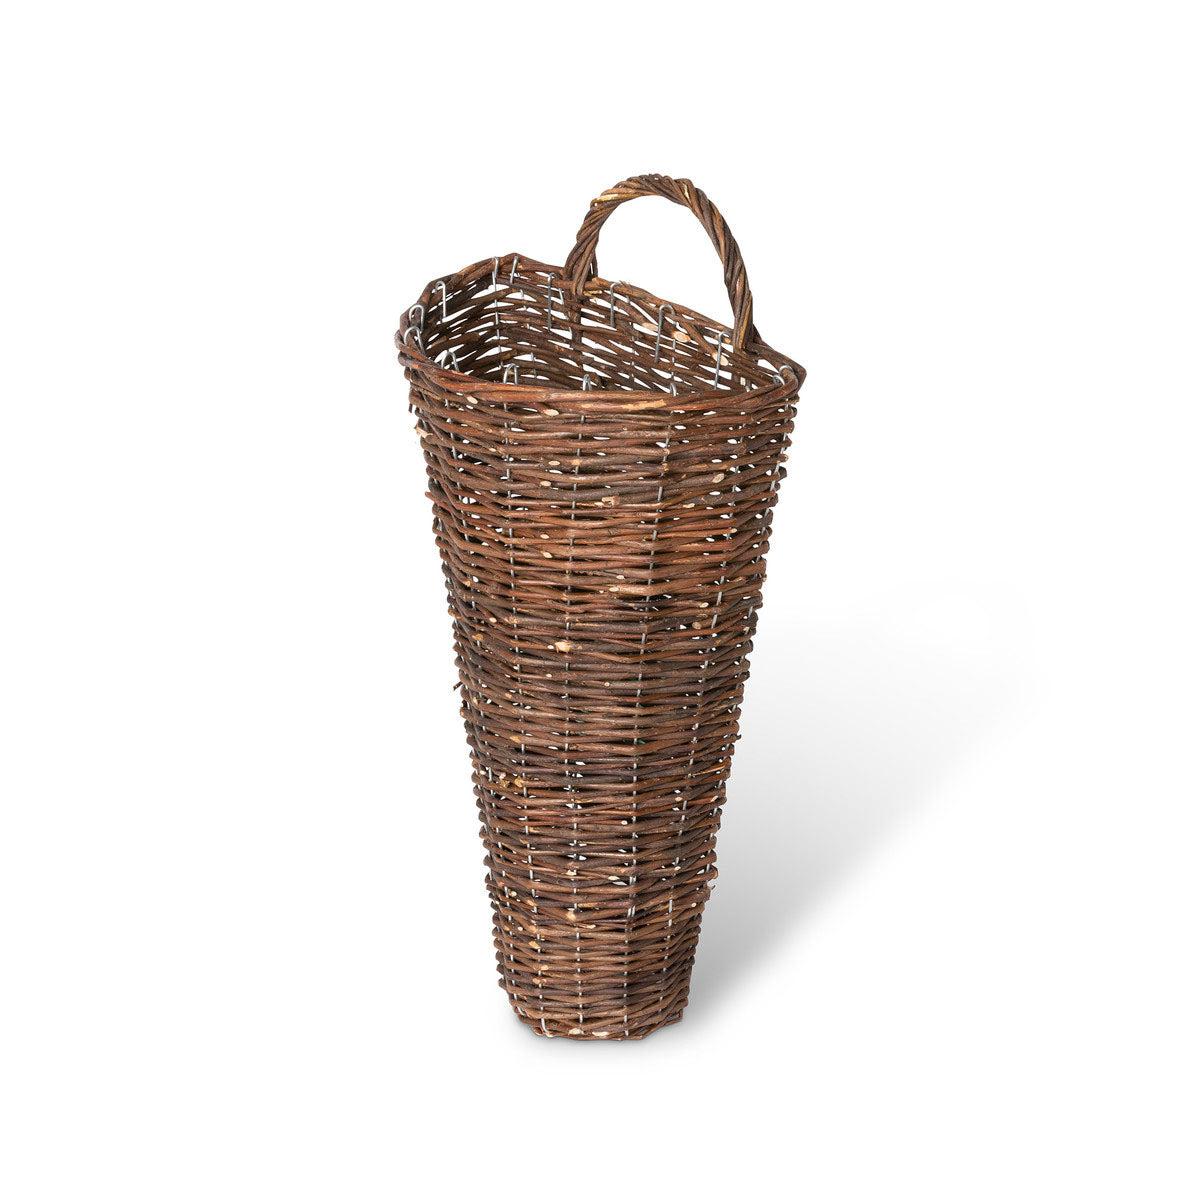 The Willow Wall Basket